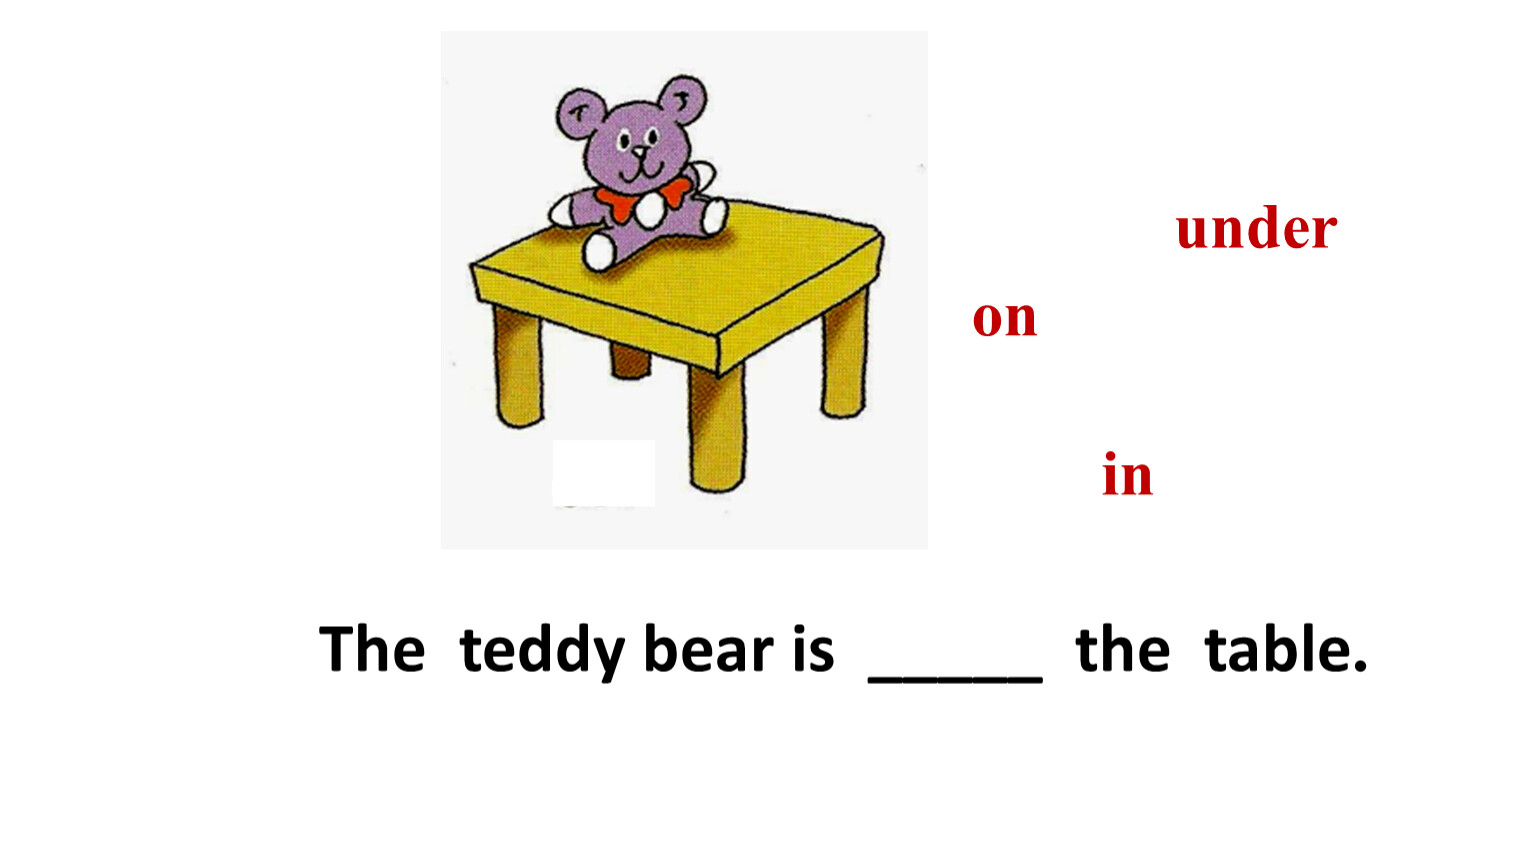 Where is the teddy bear. In on under. On in under by. Картинка in on under. On in under by мыши.